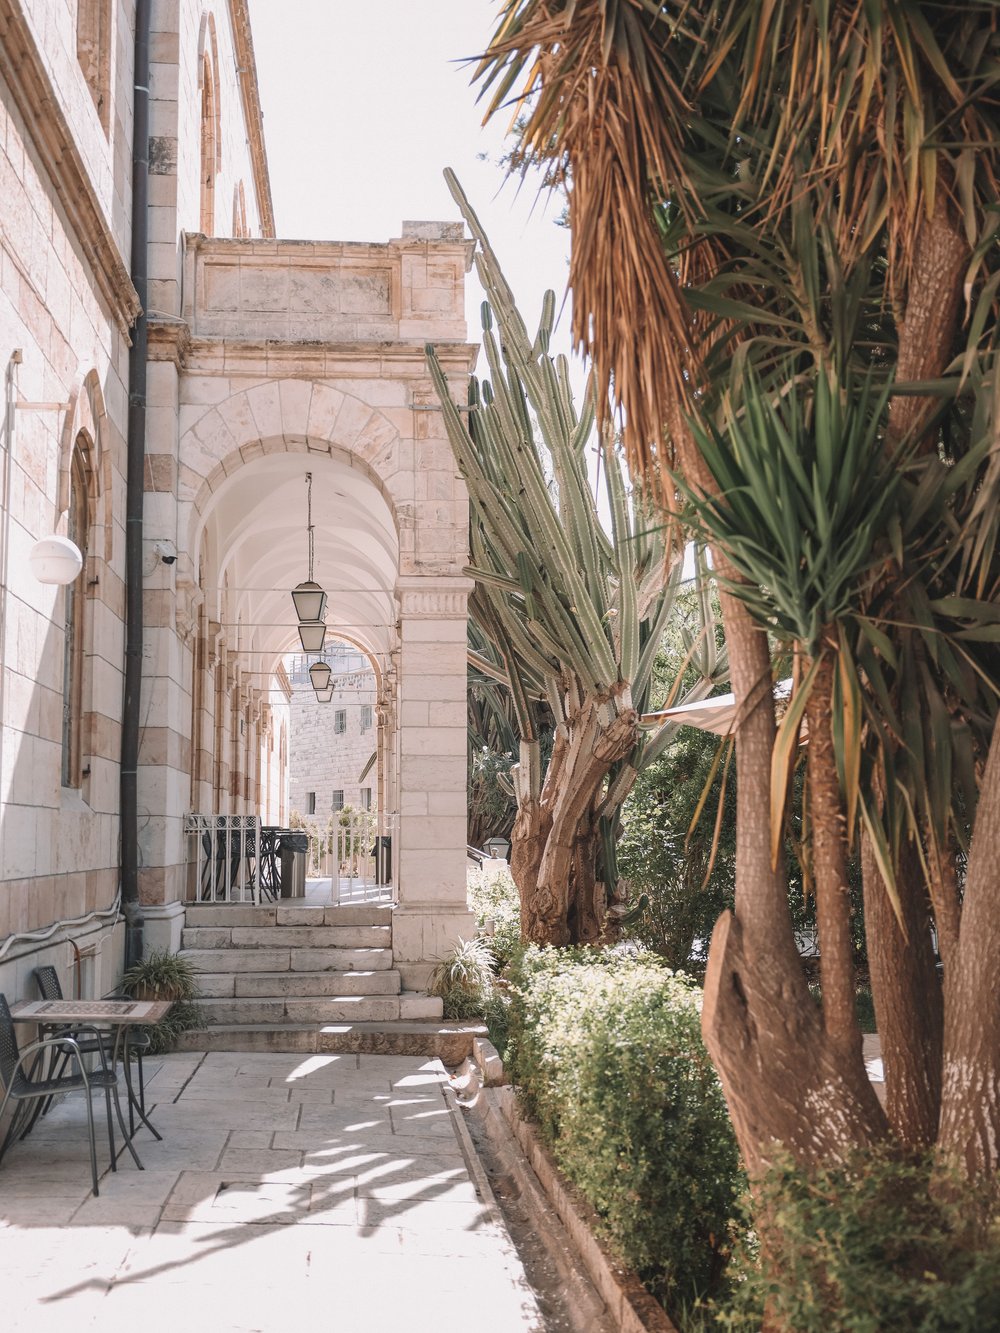 The beautiful courtyard at the Austrian Hospice - Old Town - Jerusalem - Israel